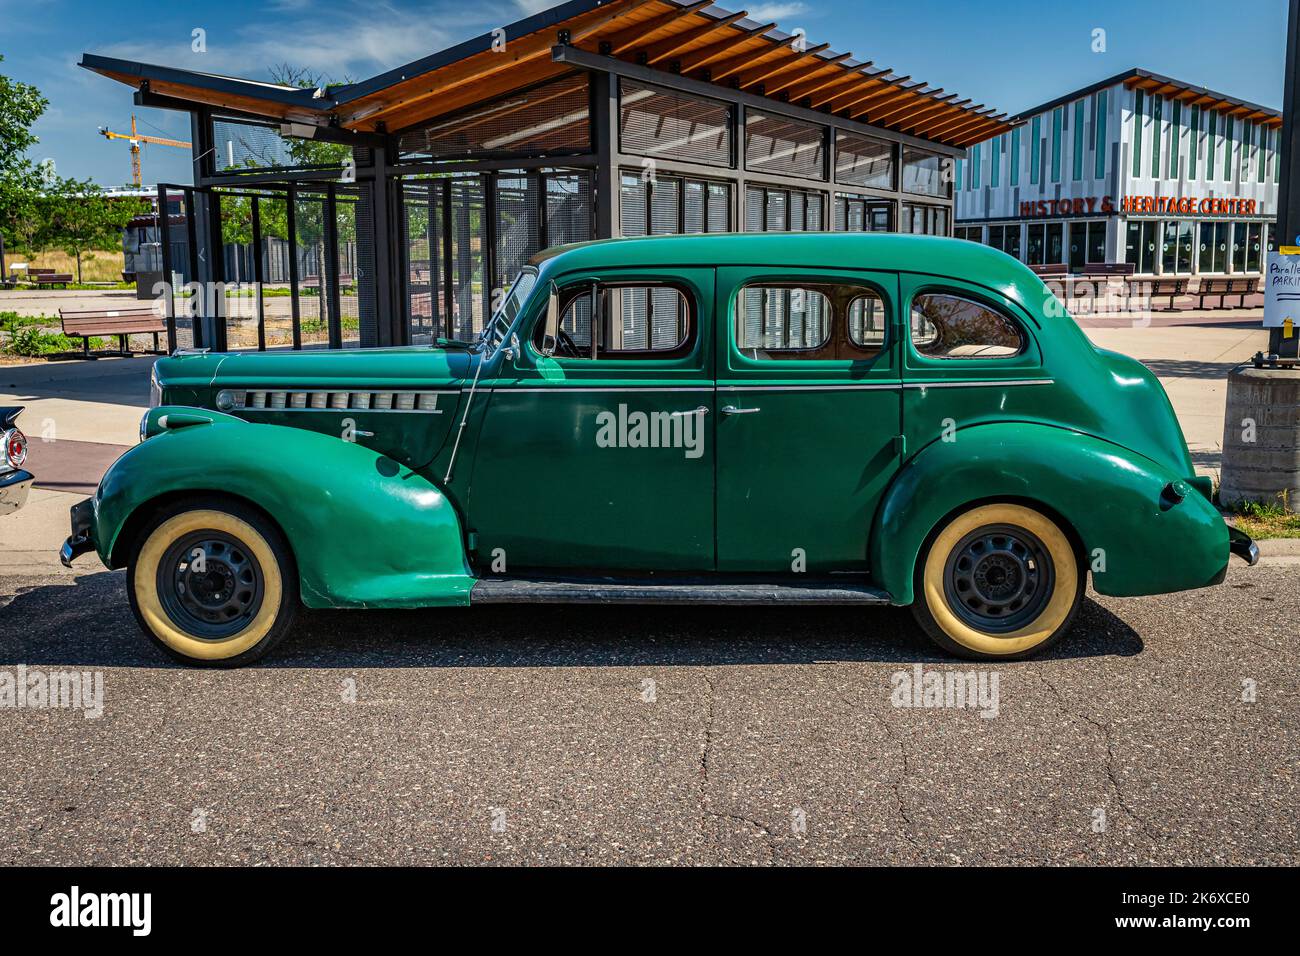 Falcon Heights, MN - June 19, 2022: High perspective side view of a 1940 Packard 110 4 Door Sedan at a local car show. Stock Photo